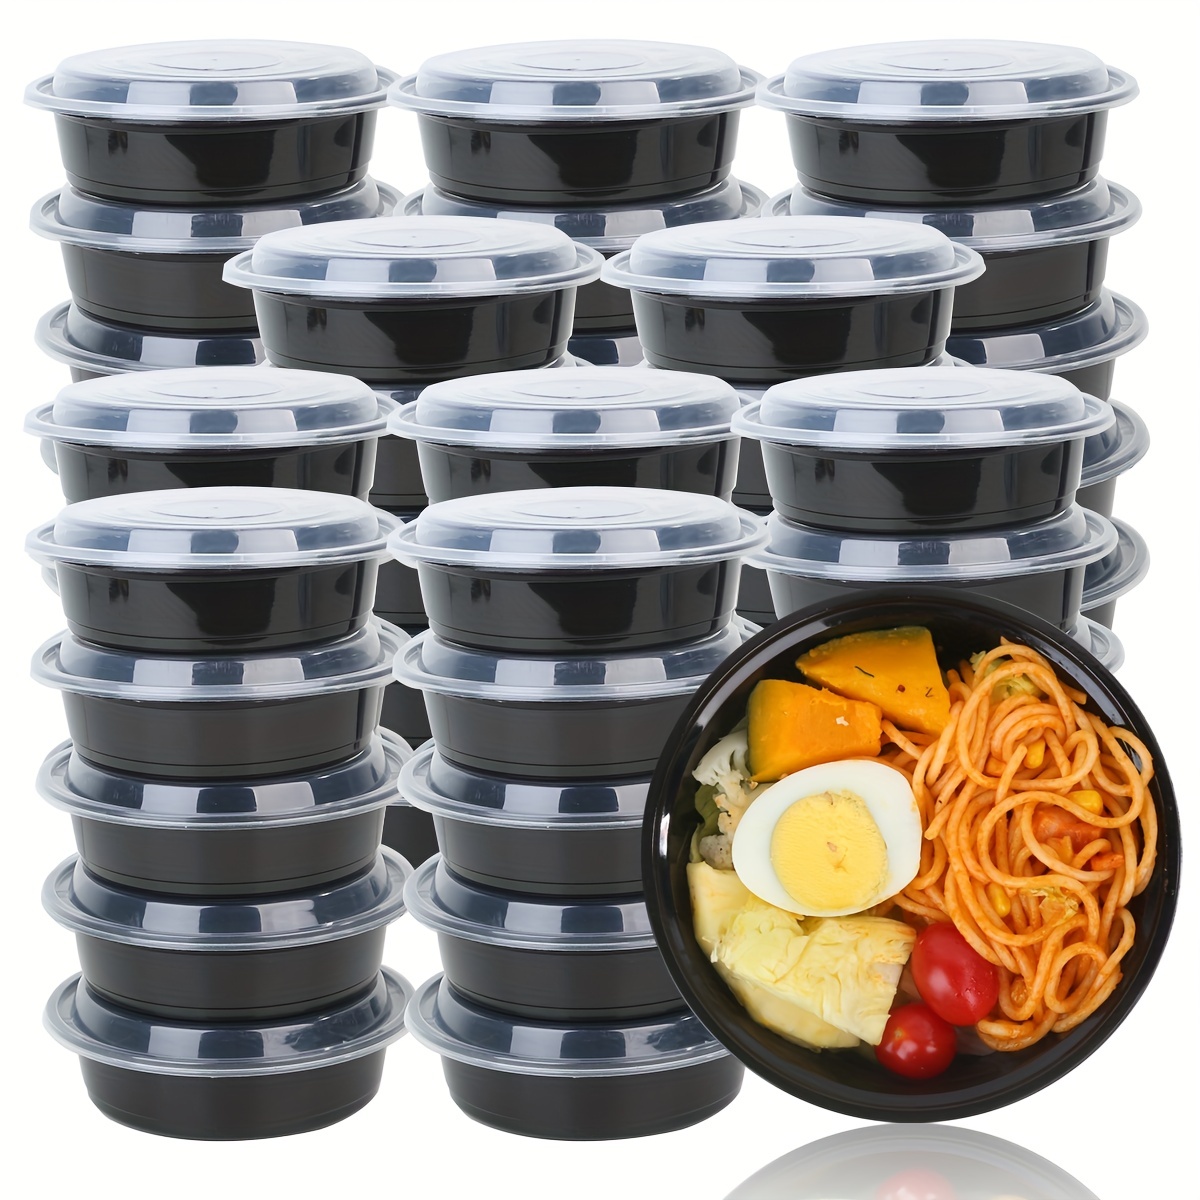 50 Pack] 40 oz Black Meal Prep Containers Round Bowls with Lids